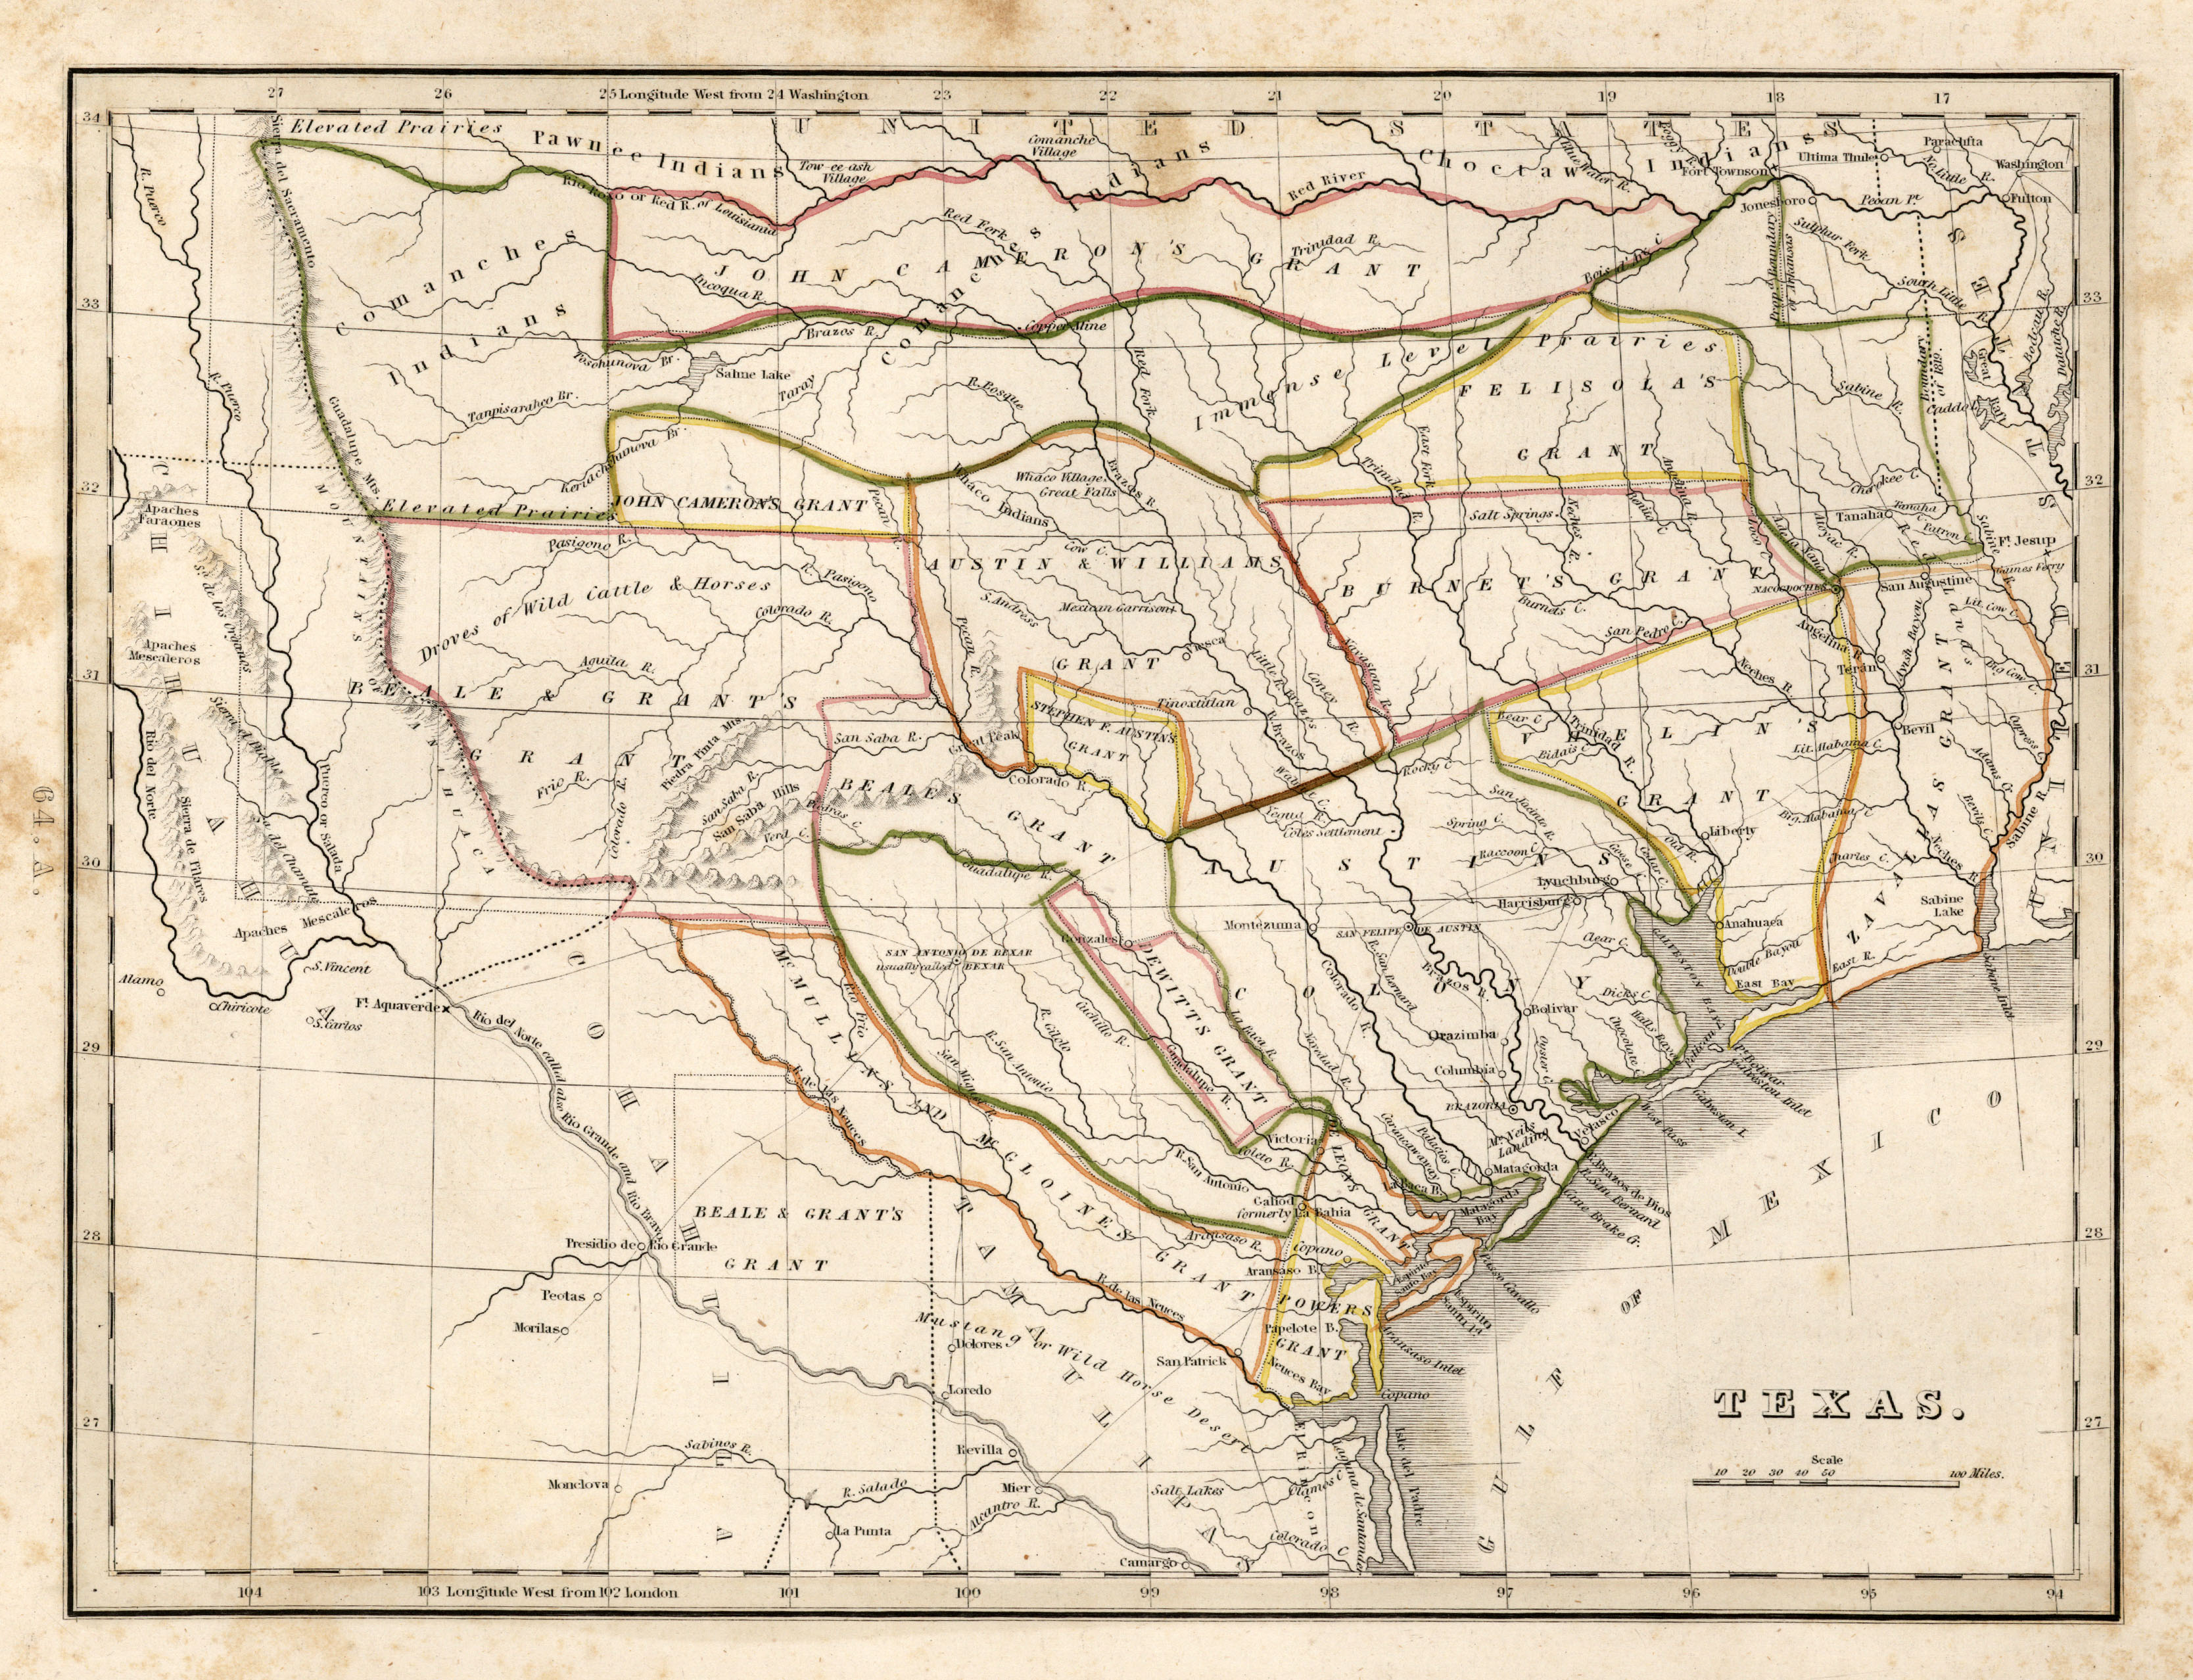 Texas Historical Maps - Perry-Castañeda Map Collection - Ut Library - Vintage Texas Maps For Sale